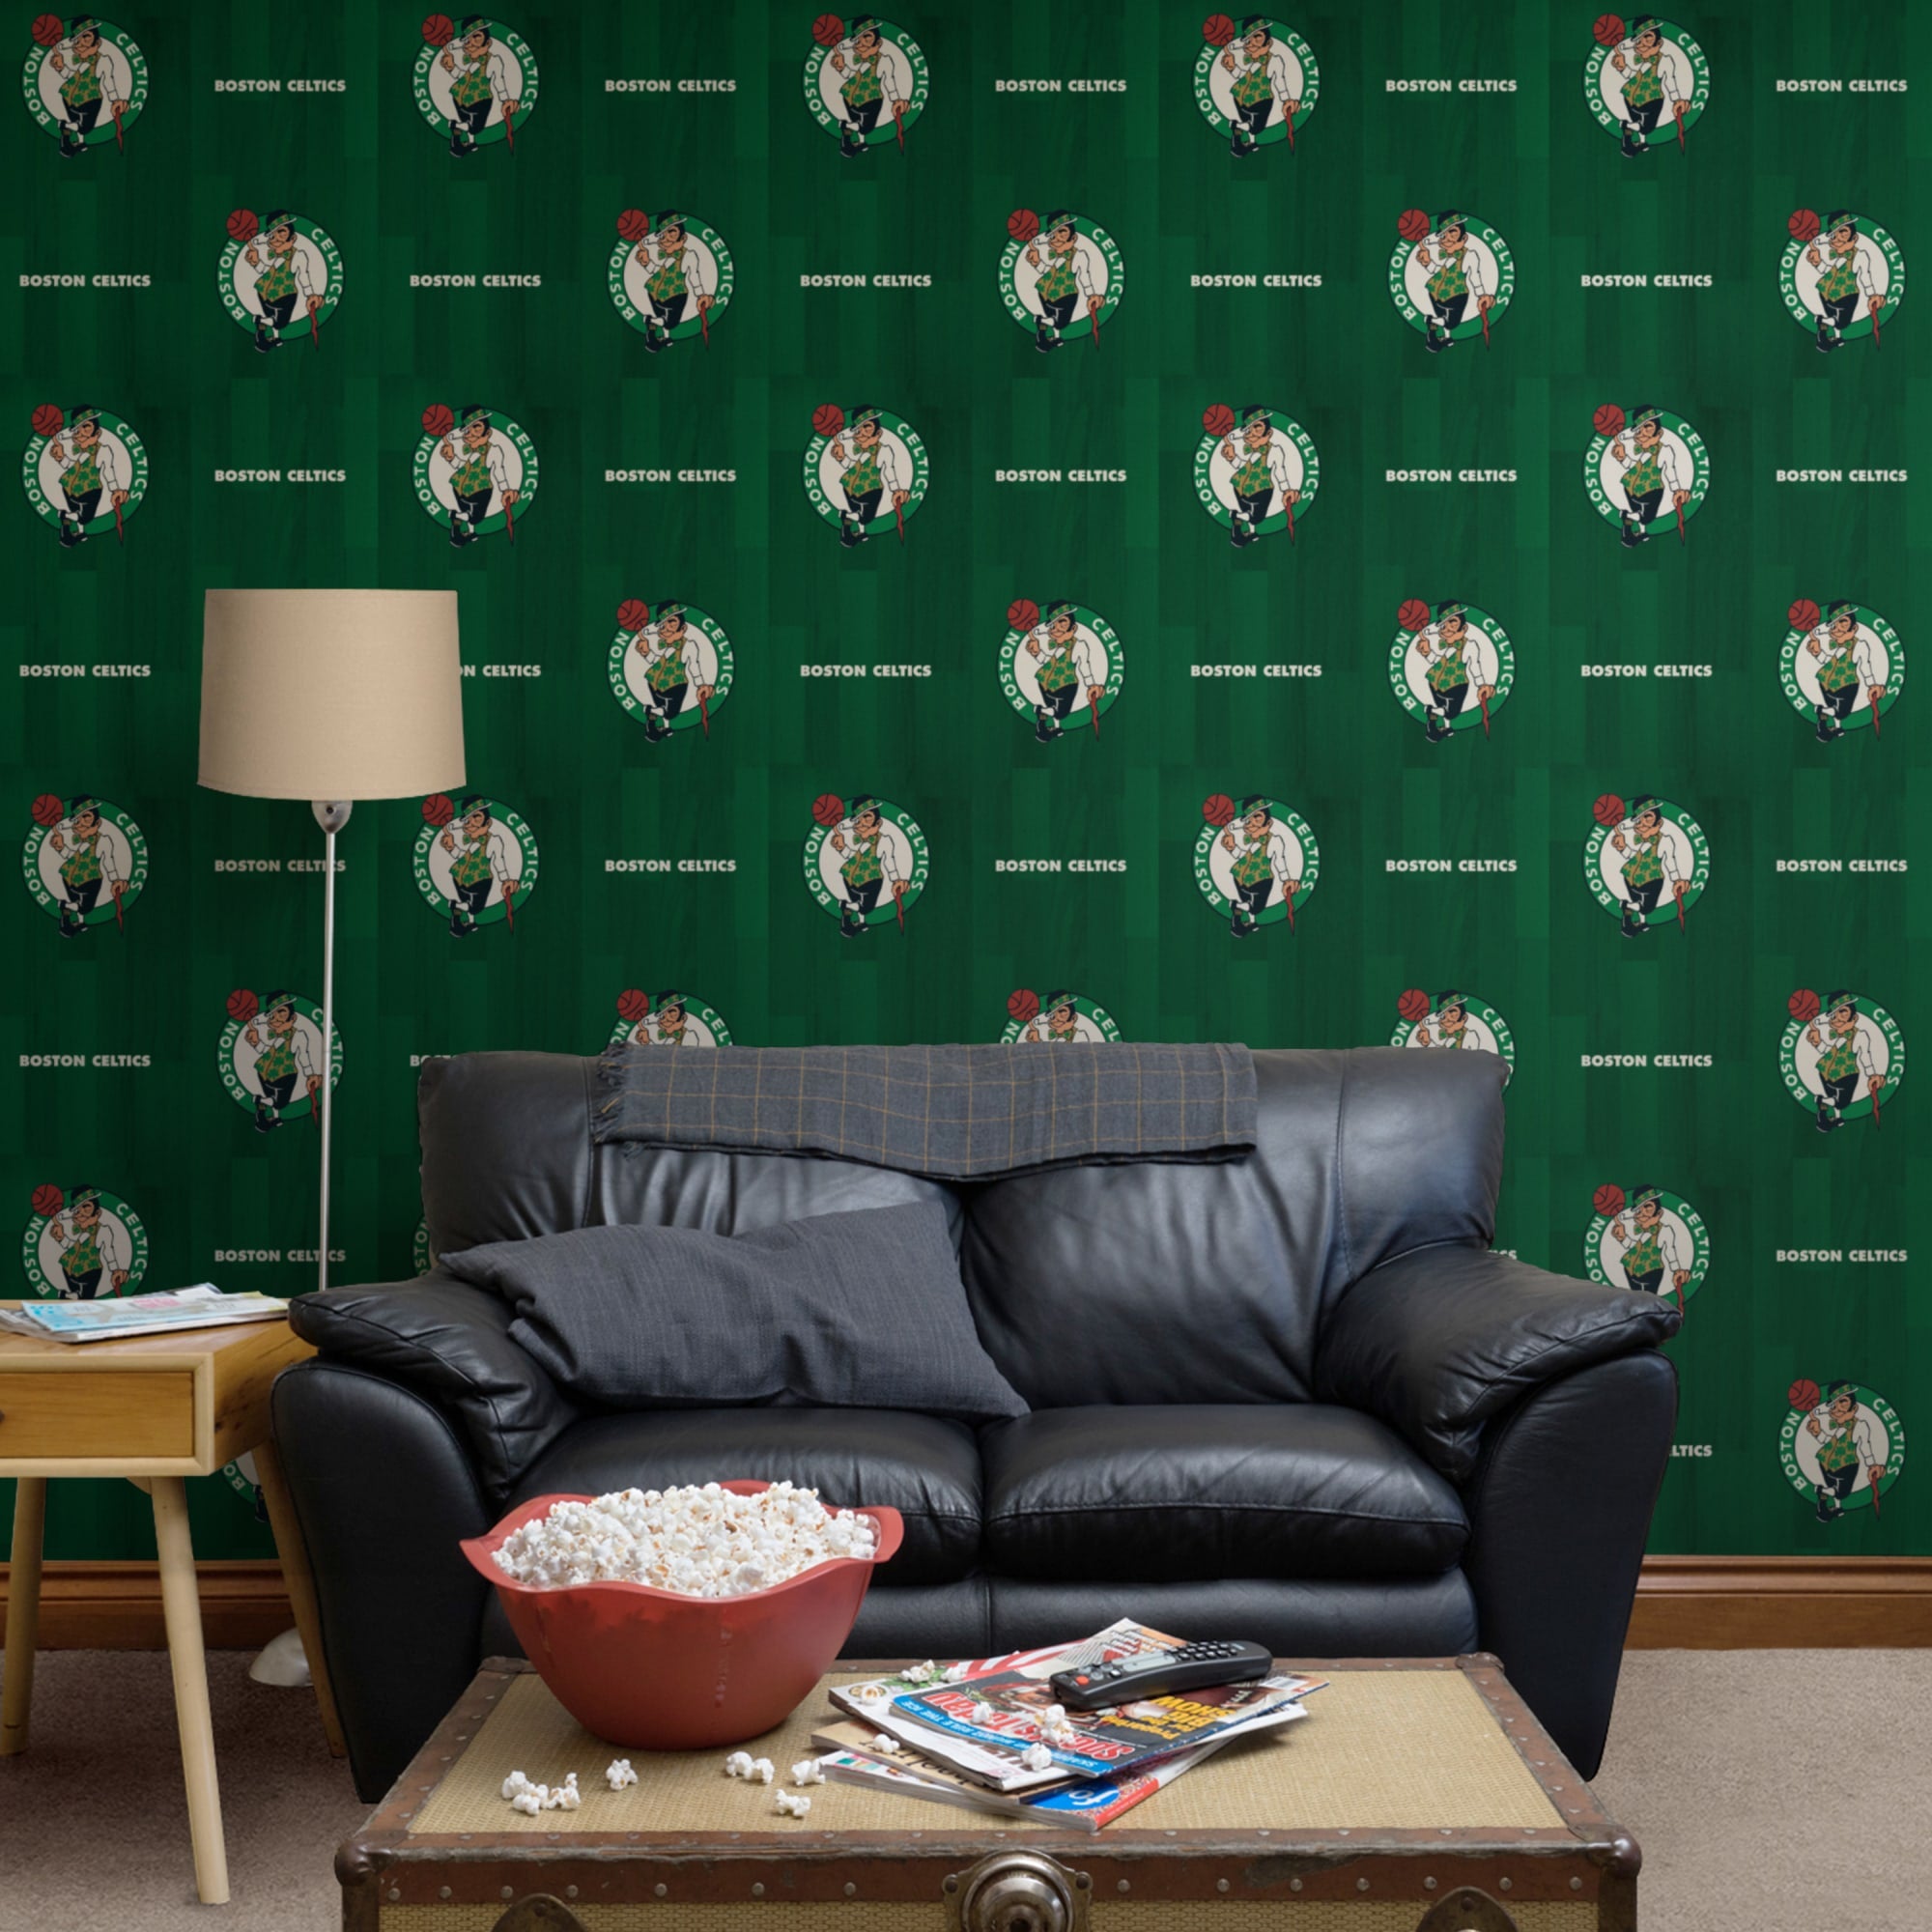 Boston Celtics: Hardwood Pattern - Officially Licensed Removable Wallpaper 12" x 12" Sample by Fathead